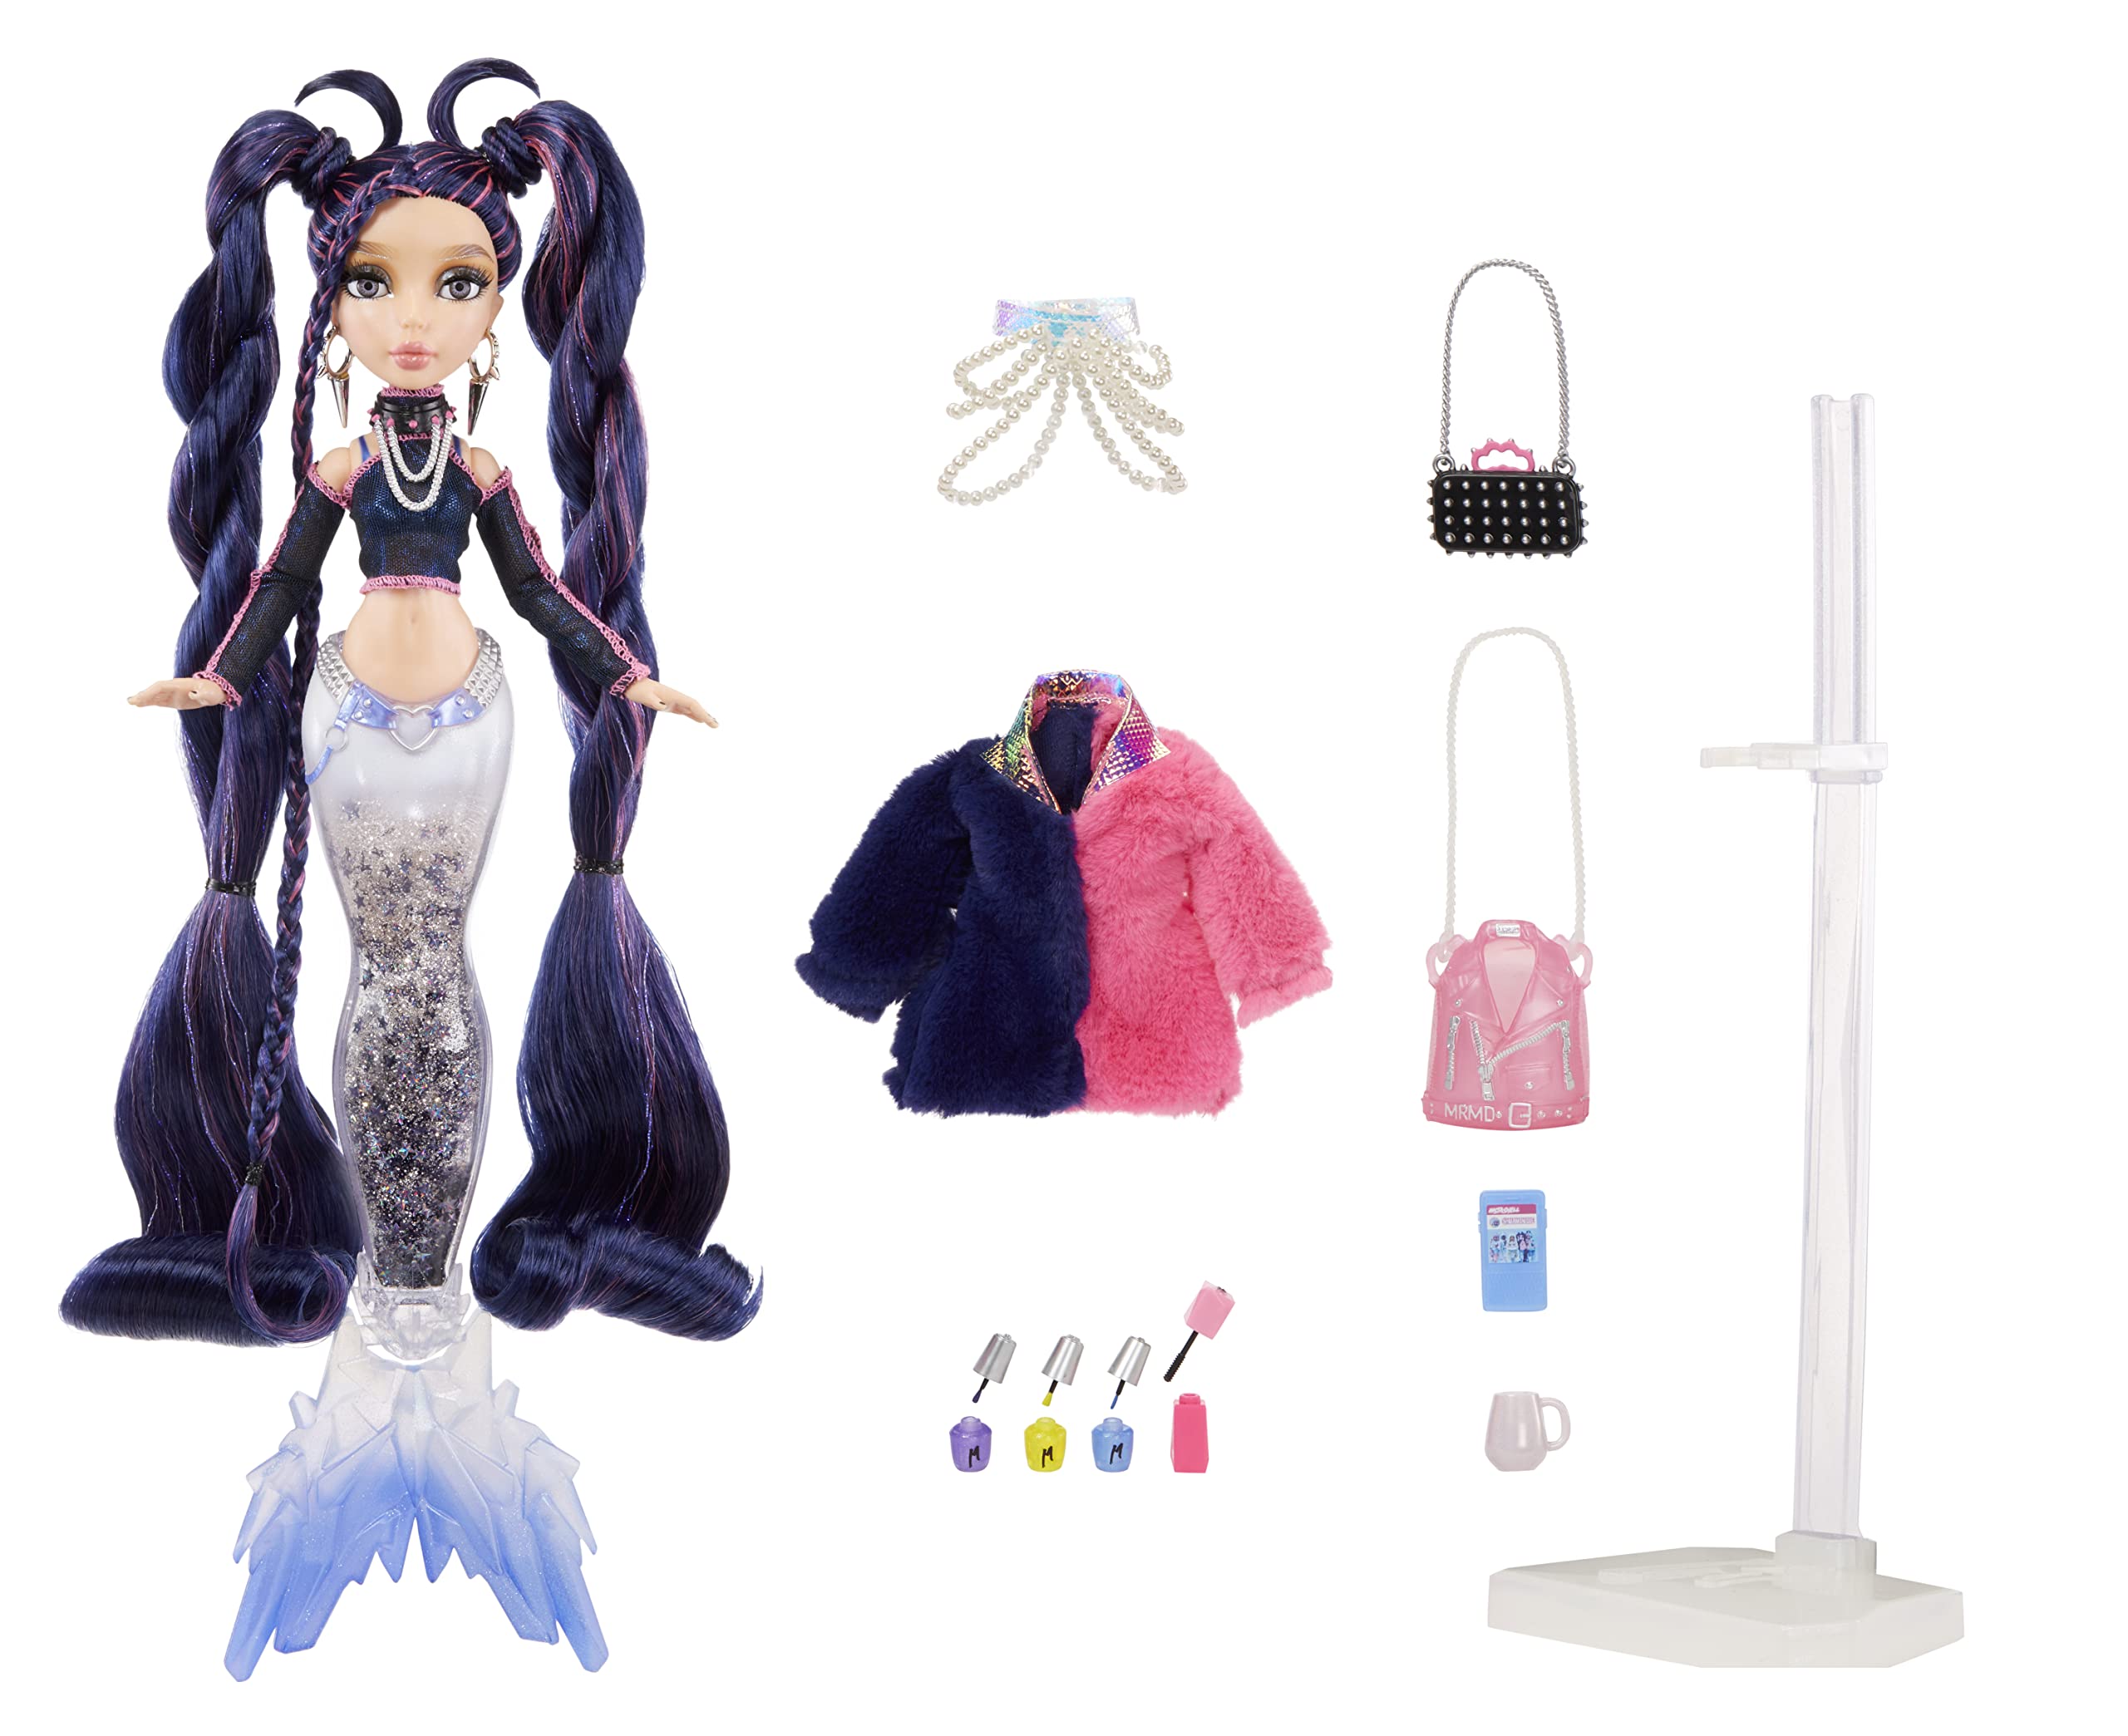 MERMAZE MERMAIDZ™ Winter Waves Nera™ Mermaid Fashion Doll with Color Change Fin, Glitter-Filled Tail and Accessories